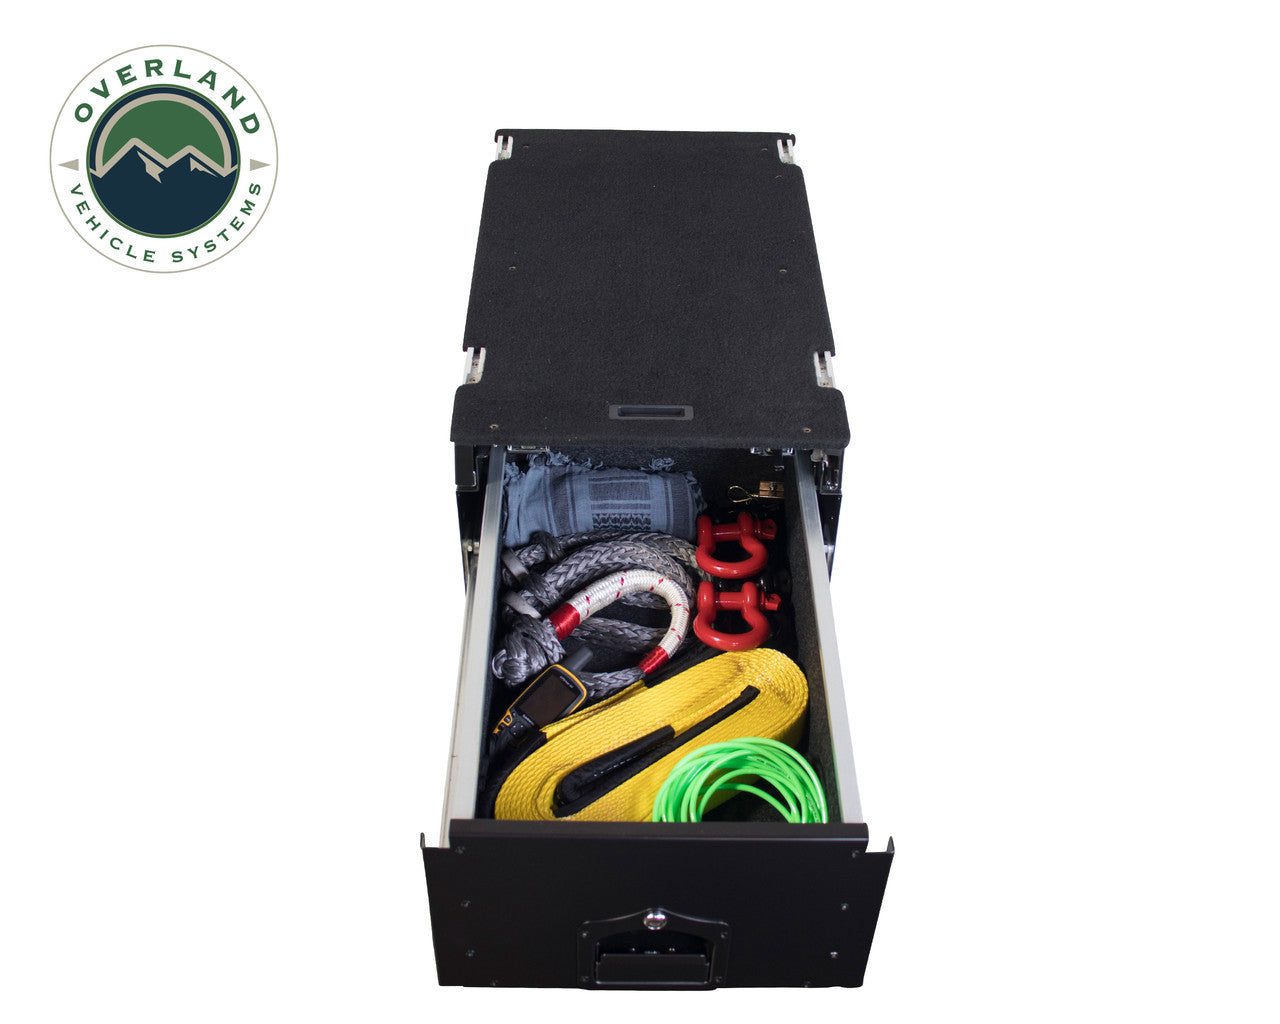 Overland Vehicle Systems Cargo Box with Working Station